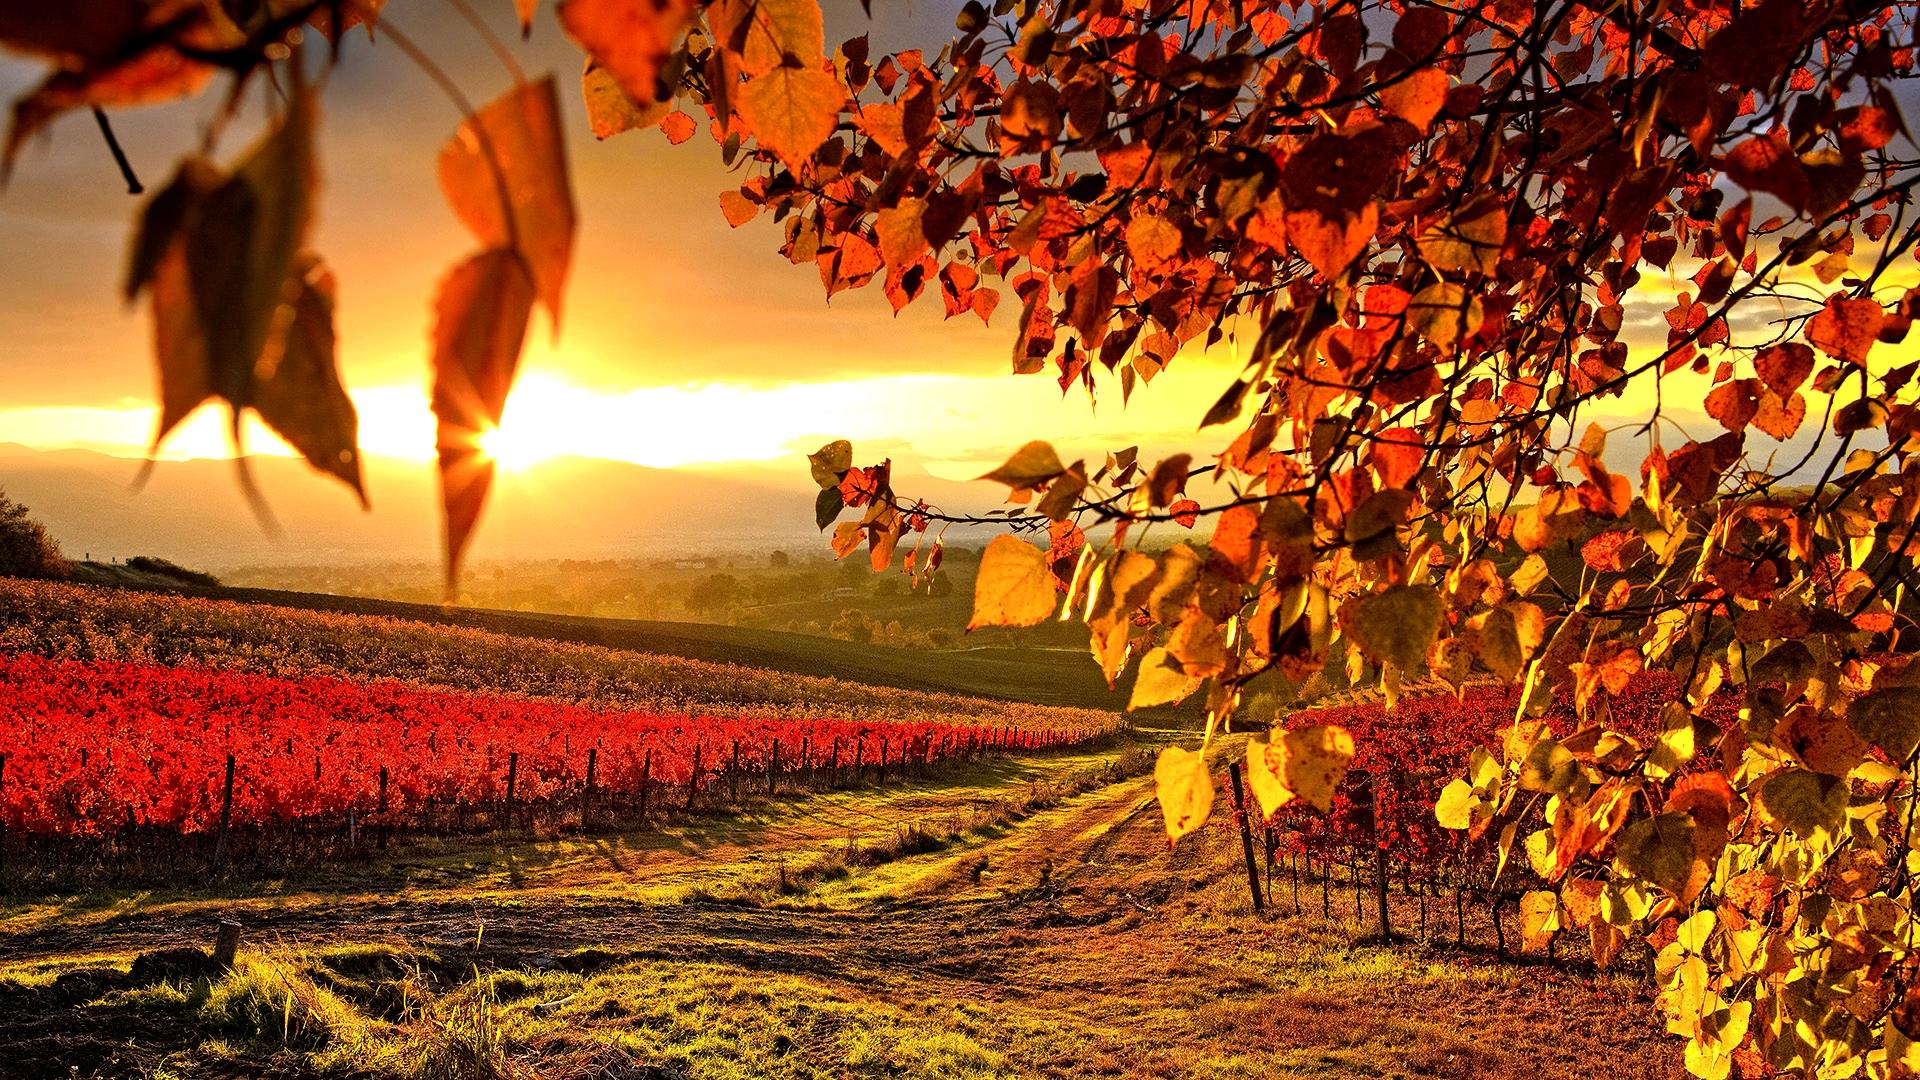 Free download Beautiful Vineyard Autumn Wallpaper Full HD Wallpaper with 1920x1080 [1920x1080] for your Desktop, Mobile & Tablet. Explore HD Autumn Wallpaper. Fall Leaves Wallpaper HD, Autumn HD Wallpaper